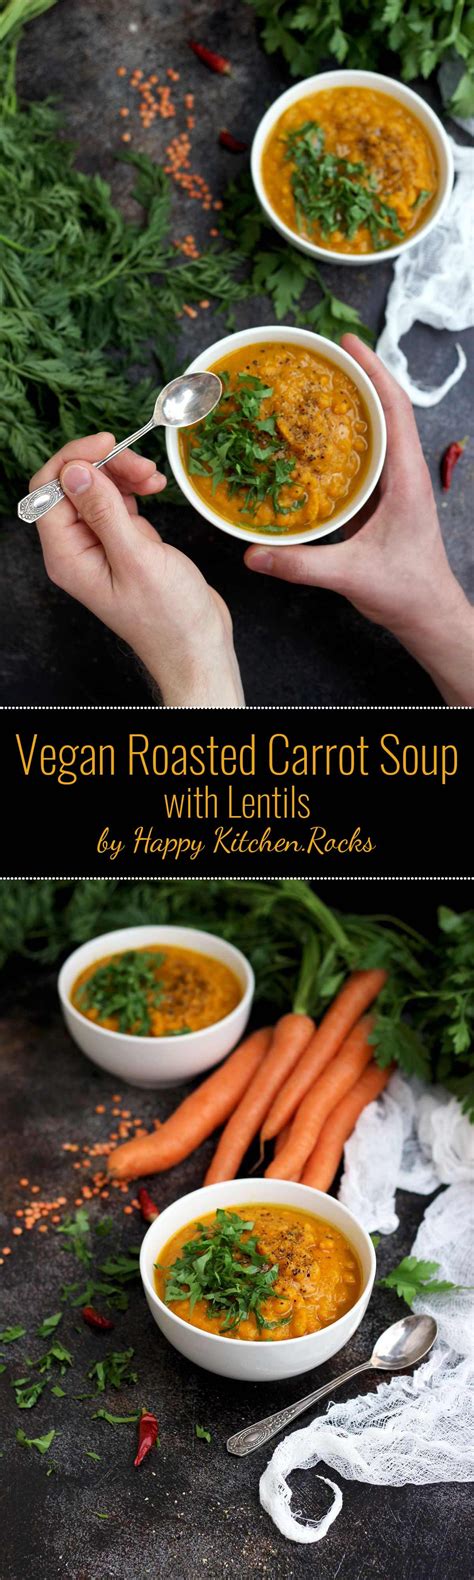 Create a batch of creamy parsnip and carrot soup for a warming lunch or supper. Easy and delicious Vegan Roasted Carrot Soup with lentils and Moroccan spices. This velvety ...